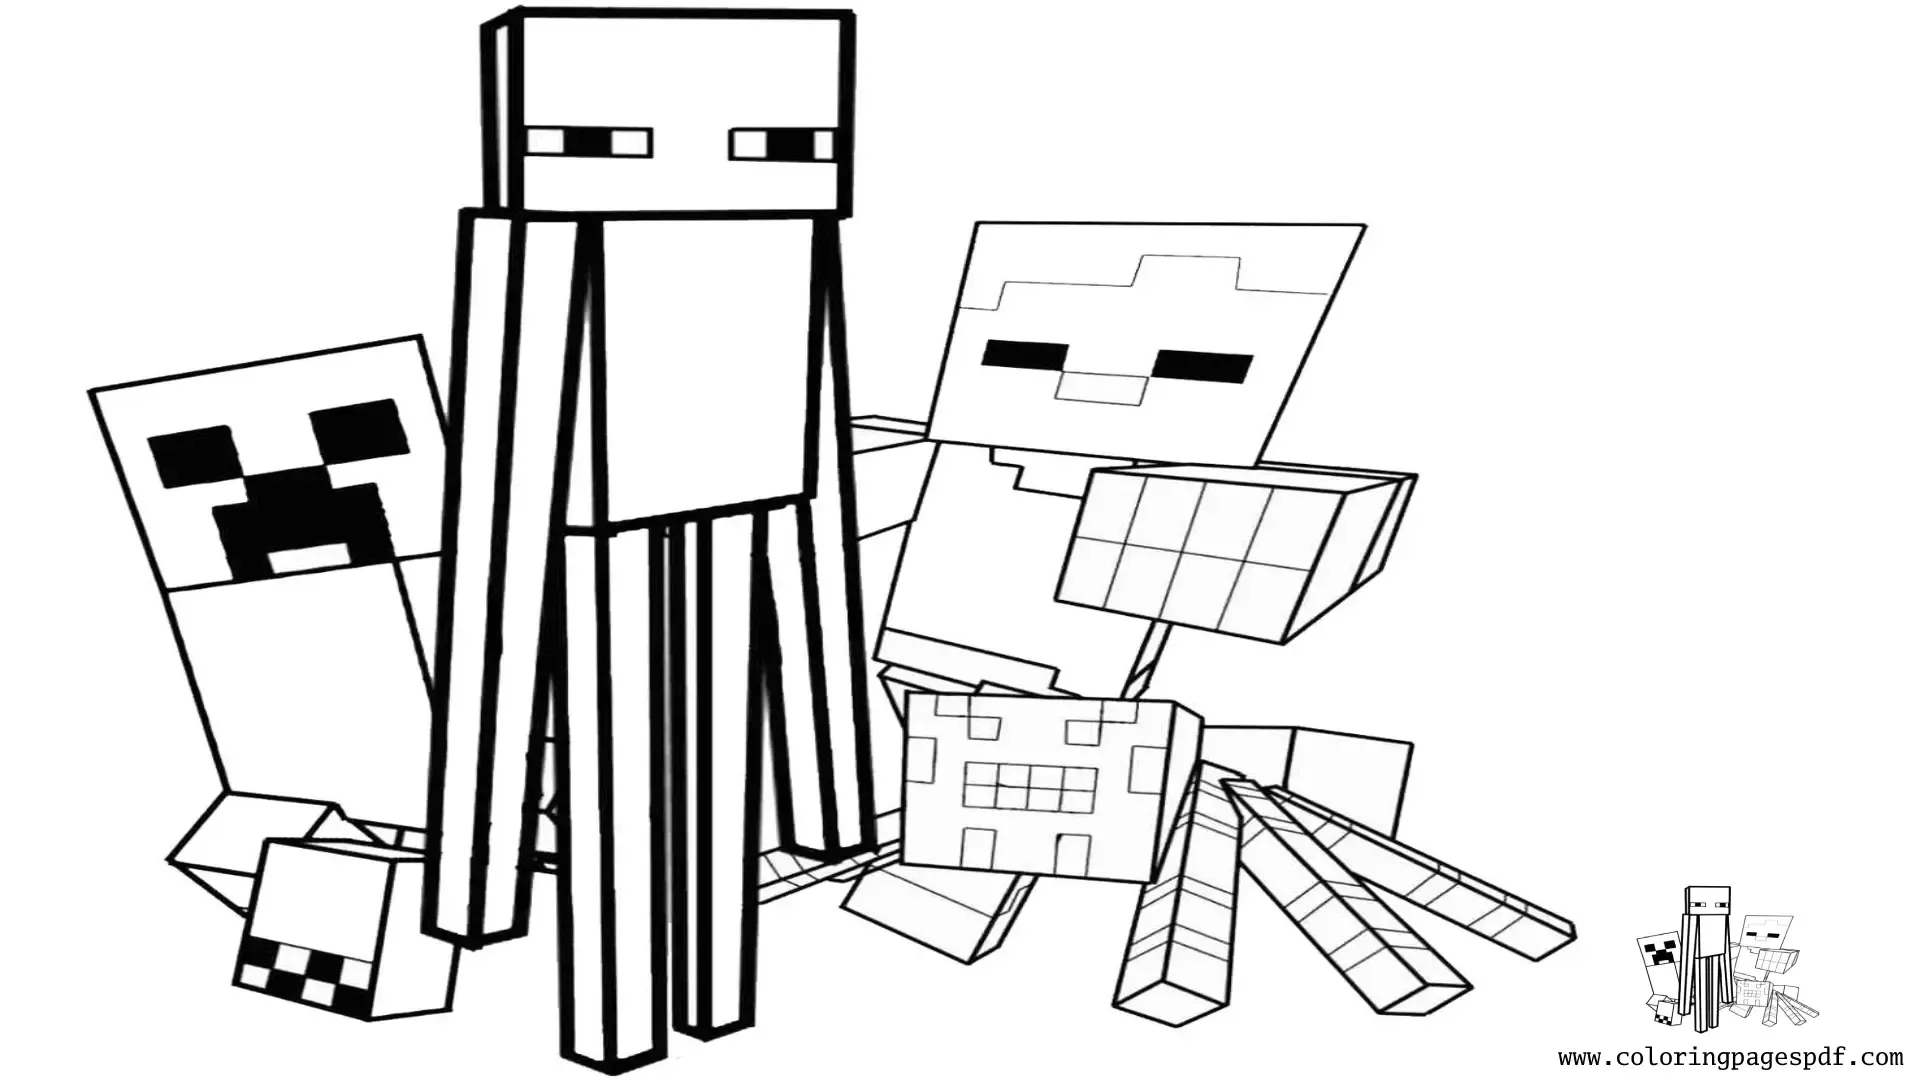 Coloring Page Of Minecraft Monsters